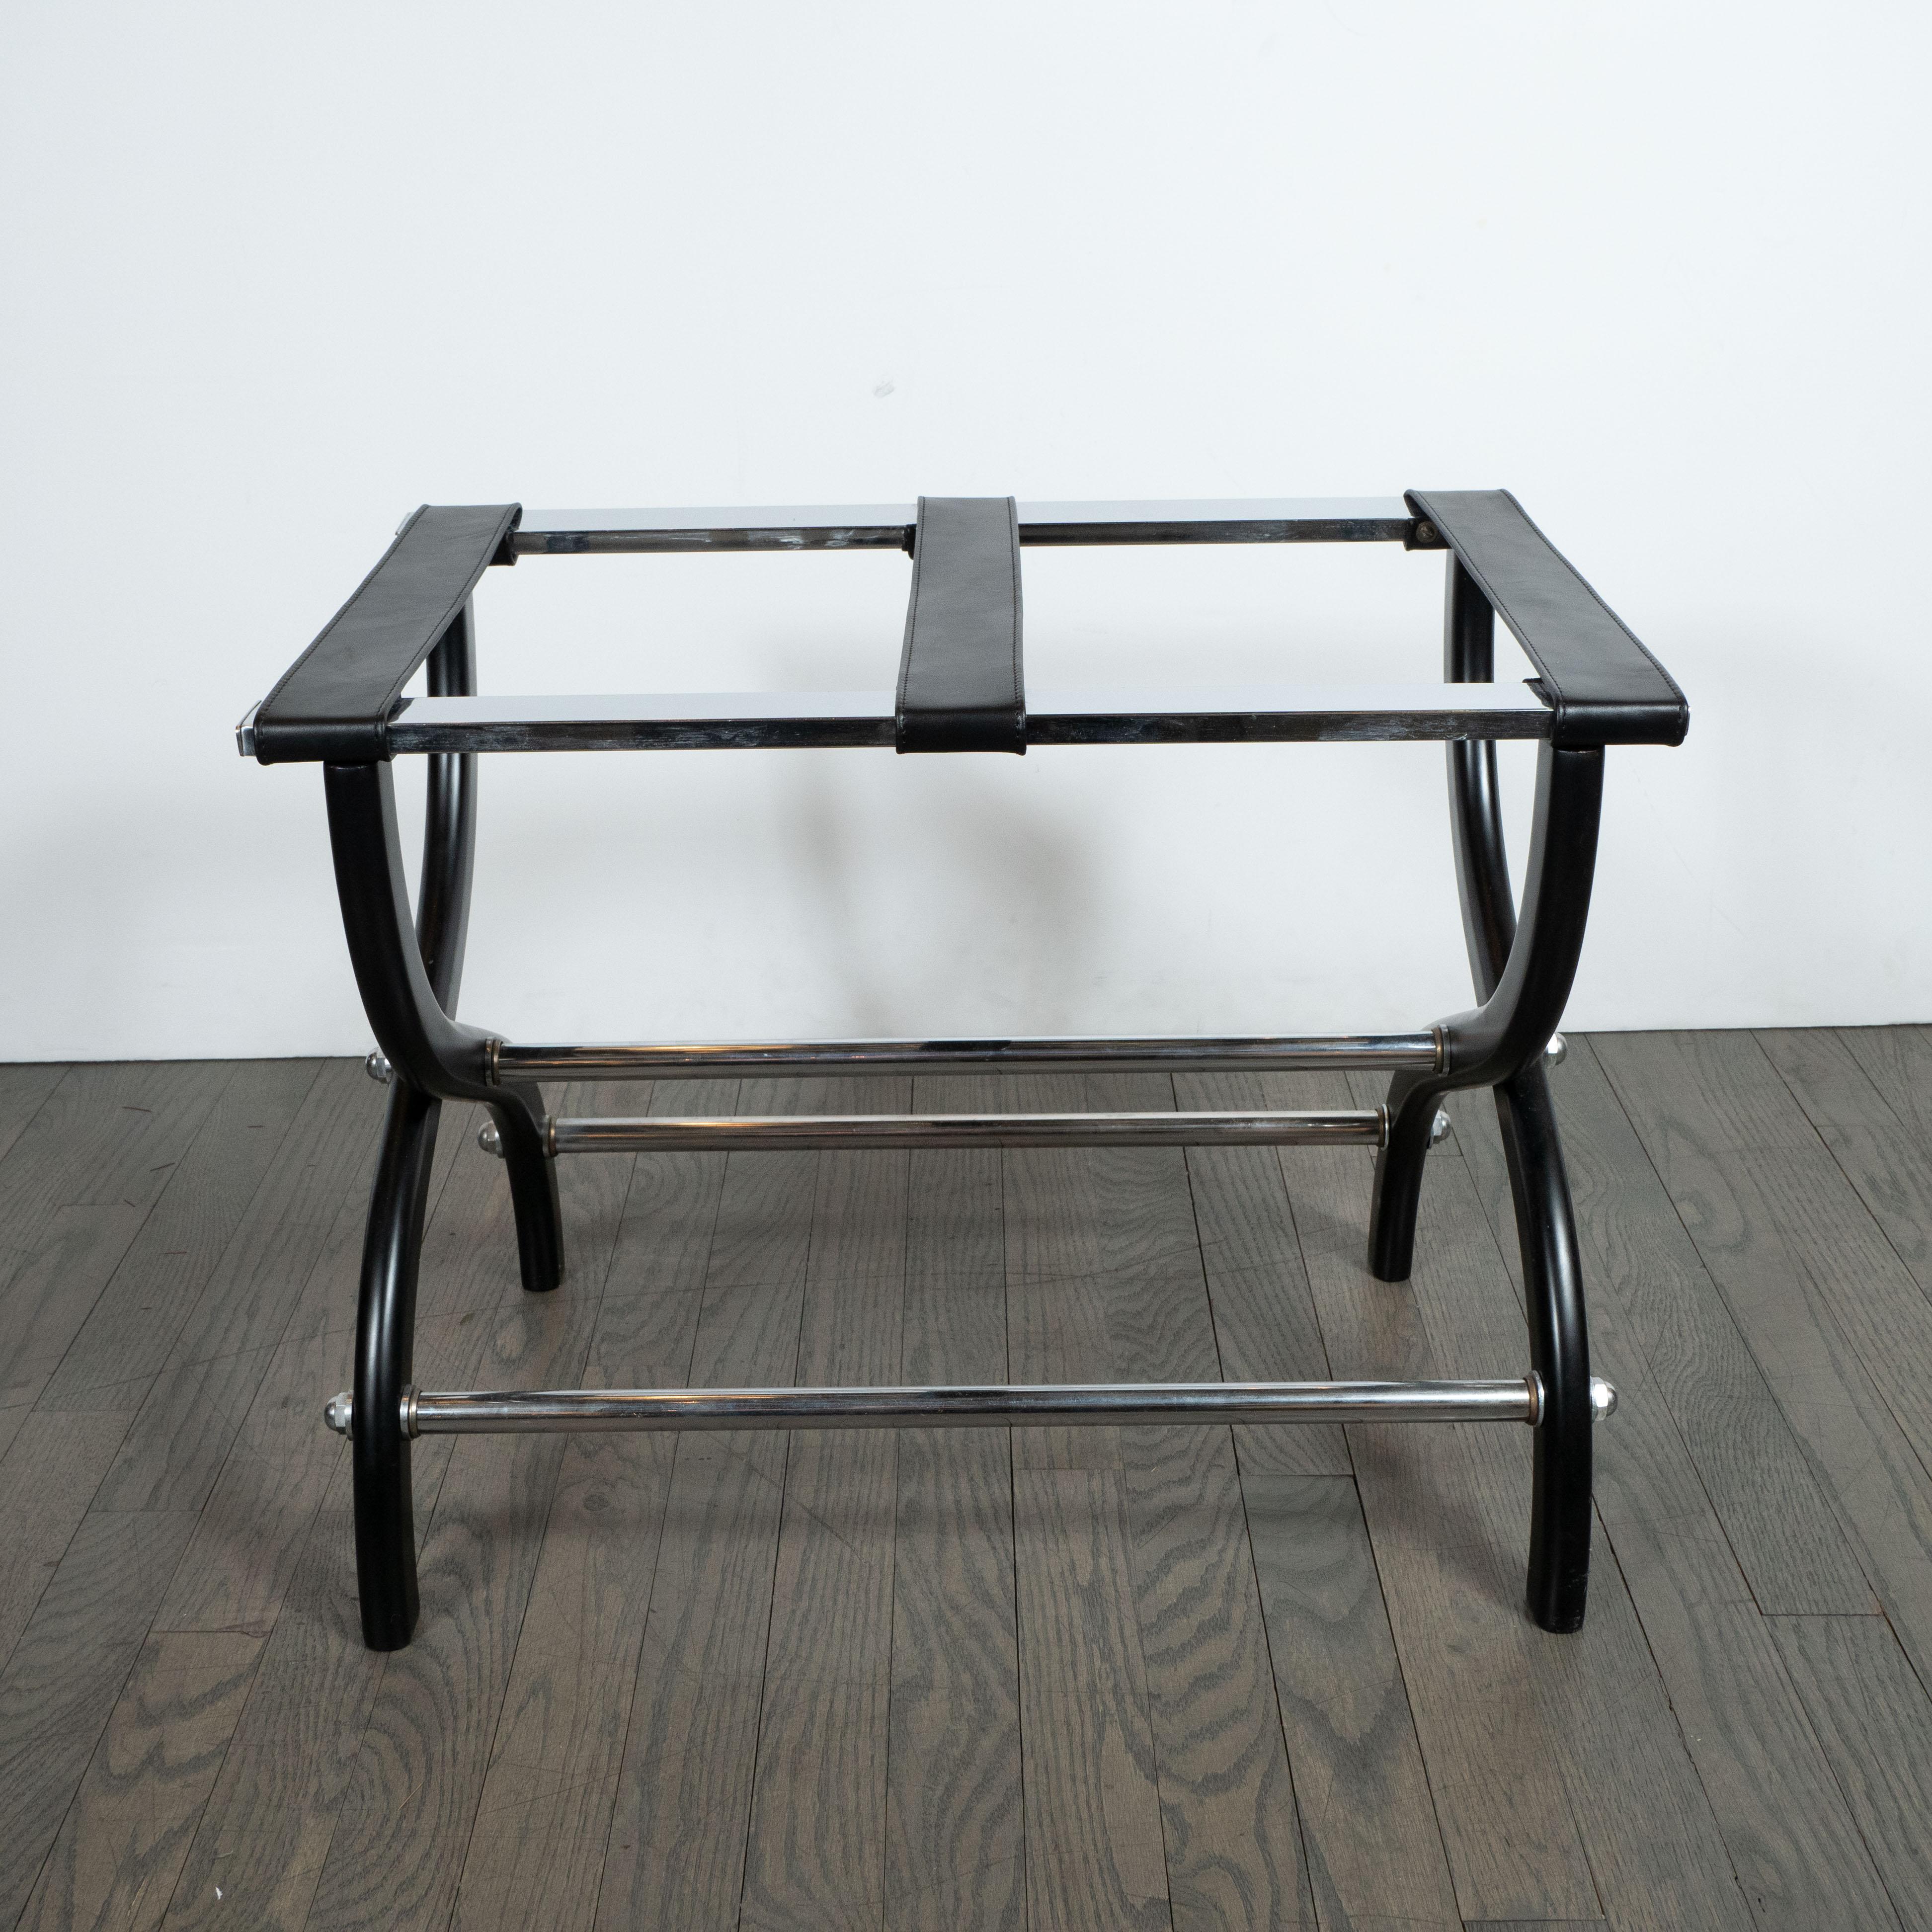 This handsome and stylish luggage rack was realized in the United States, circa 1960. It features curvilinear legs that meet in the center to create a stylized X-form base. The ebonized walnut legs are adjoined by cylindrical chrome supports that